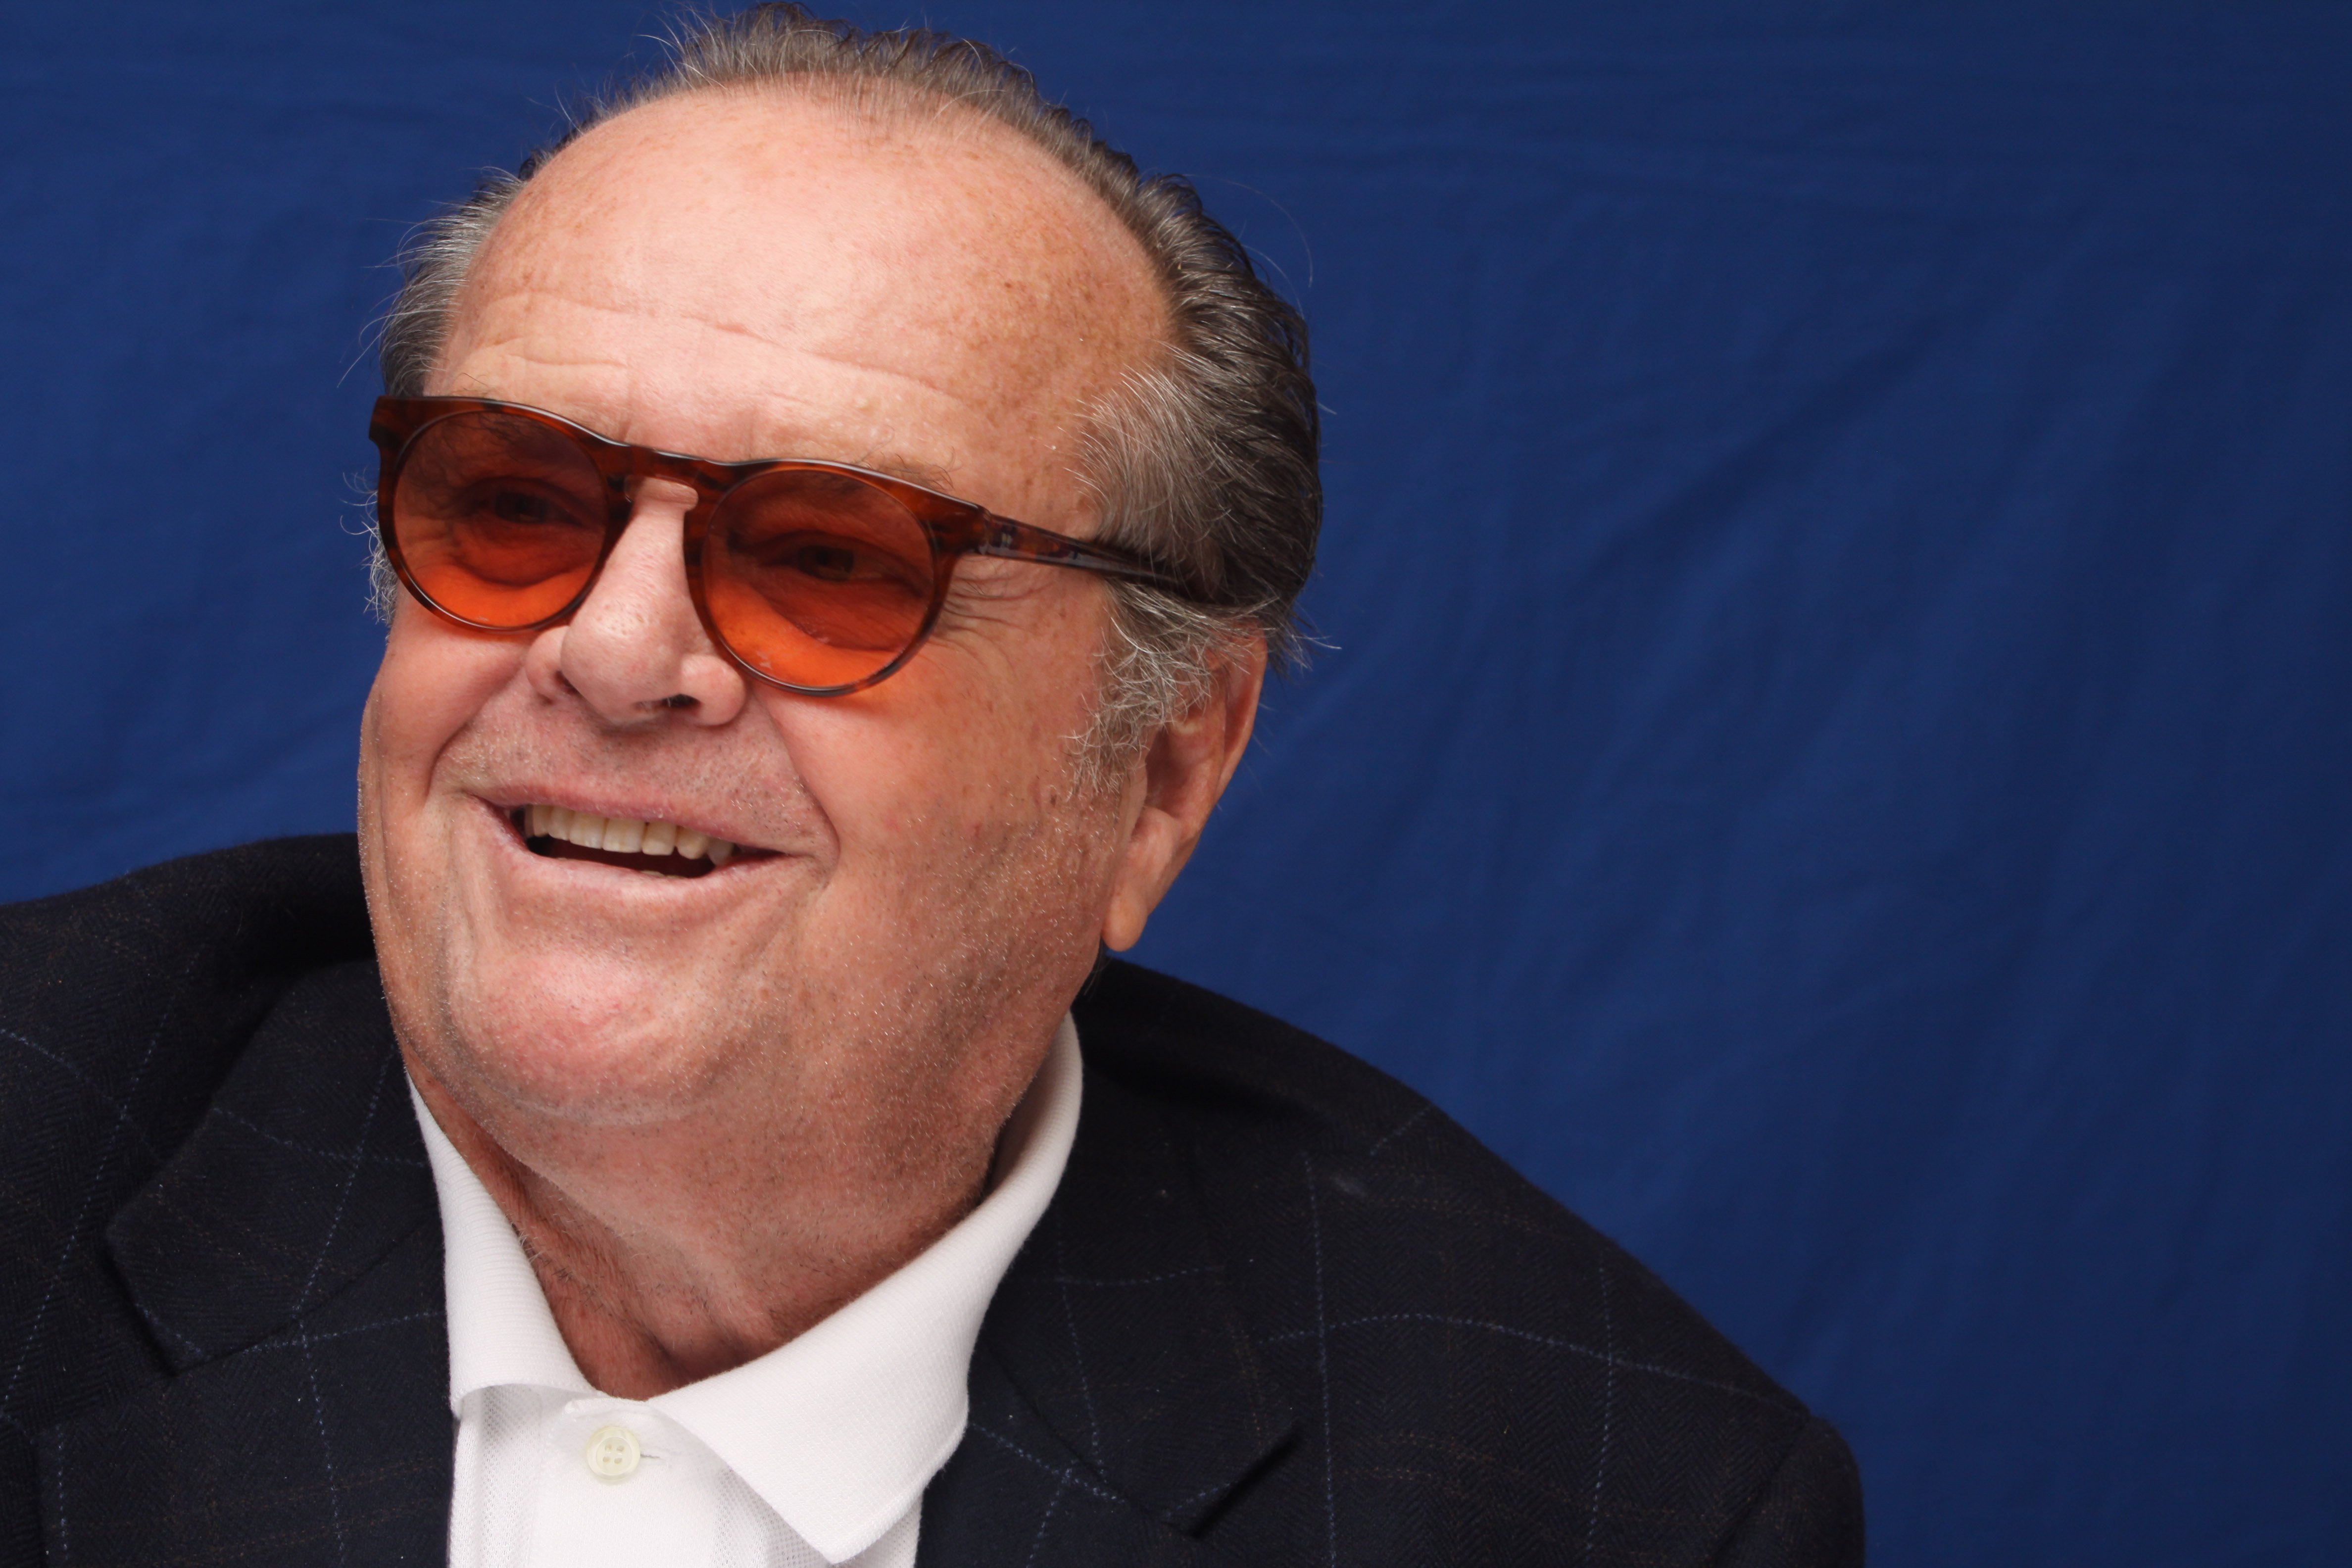 Jack Nicholson poses for a photo during a portrait session in New York, NY on December 7, 2010.